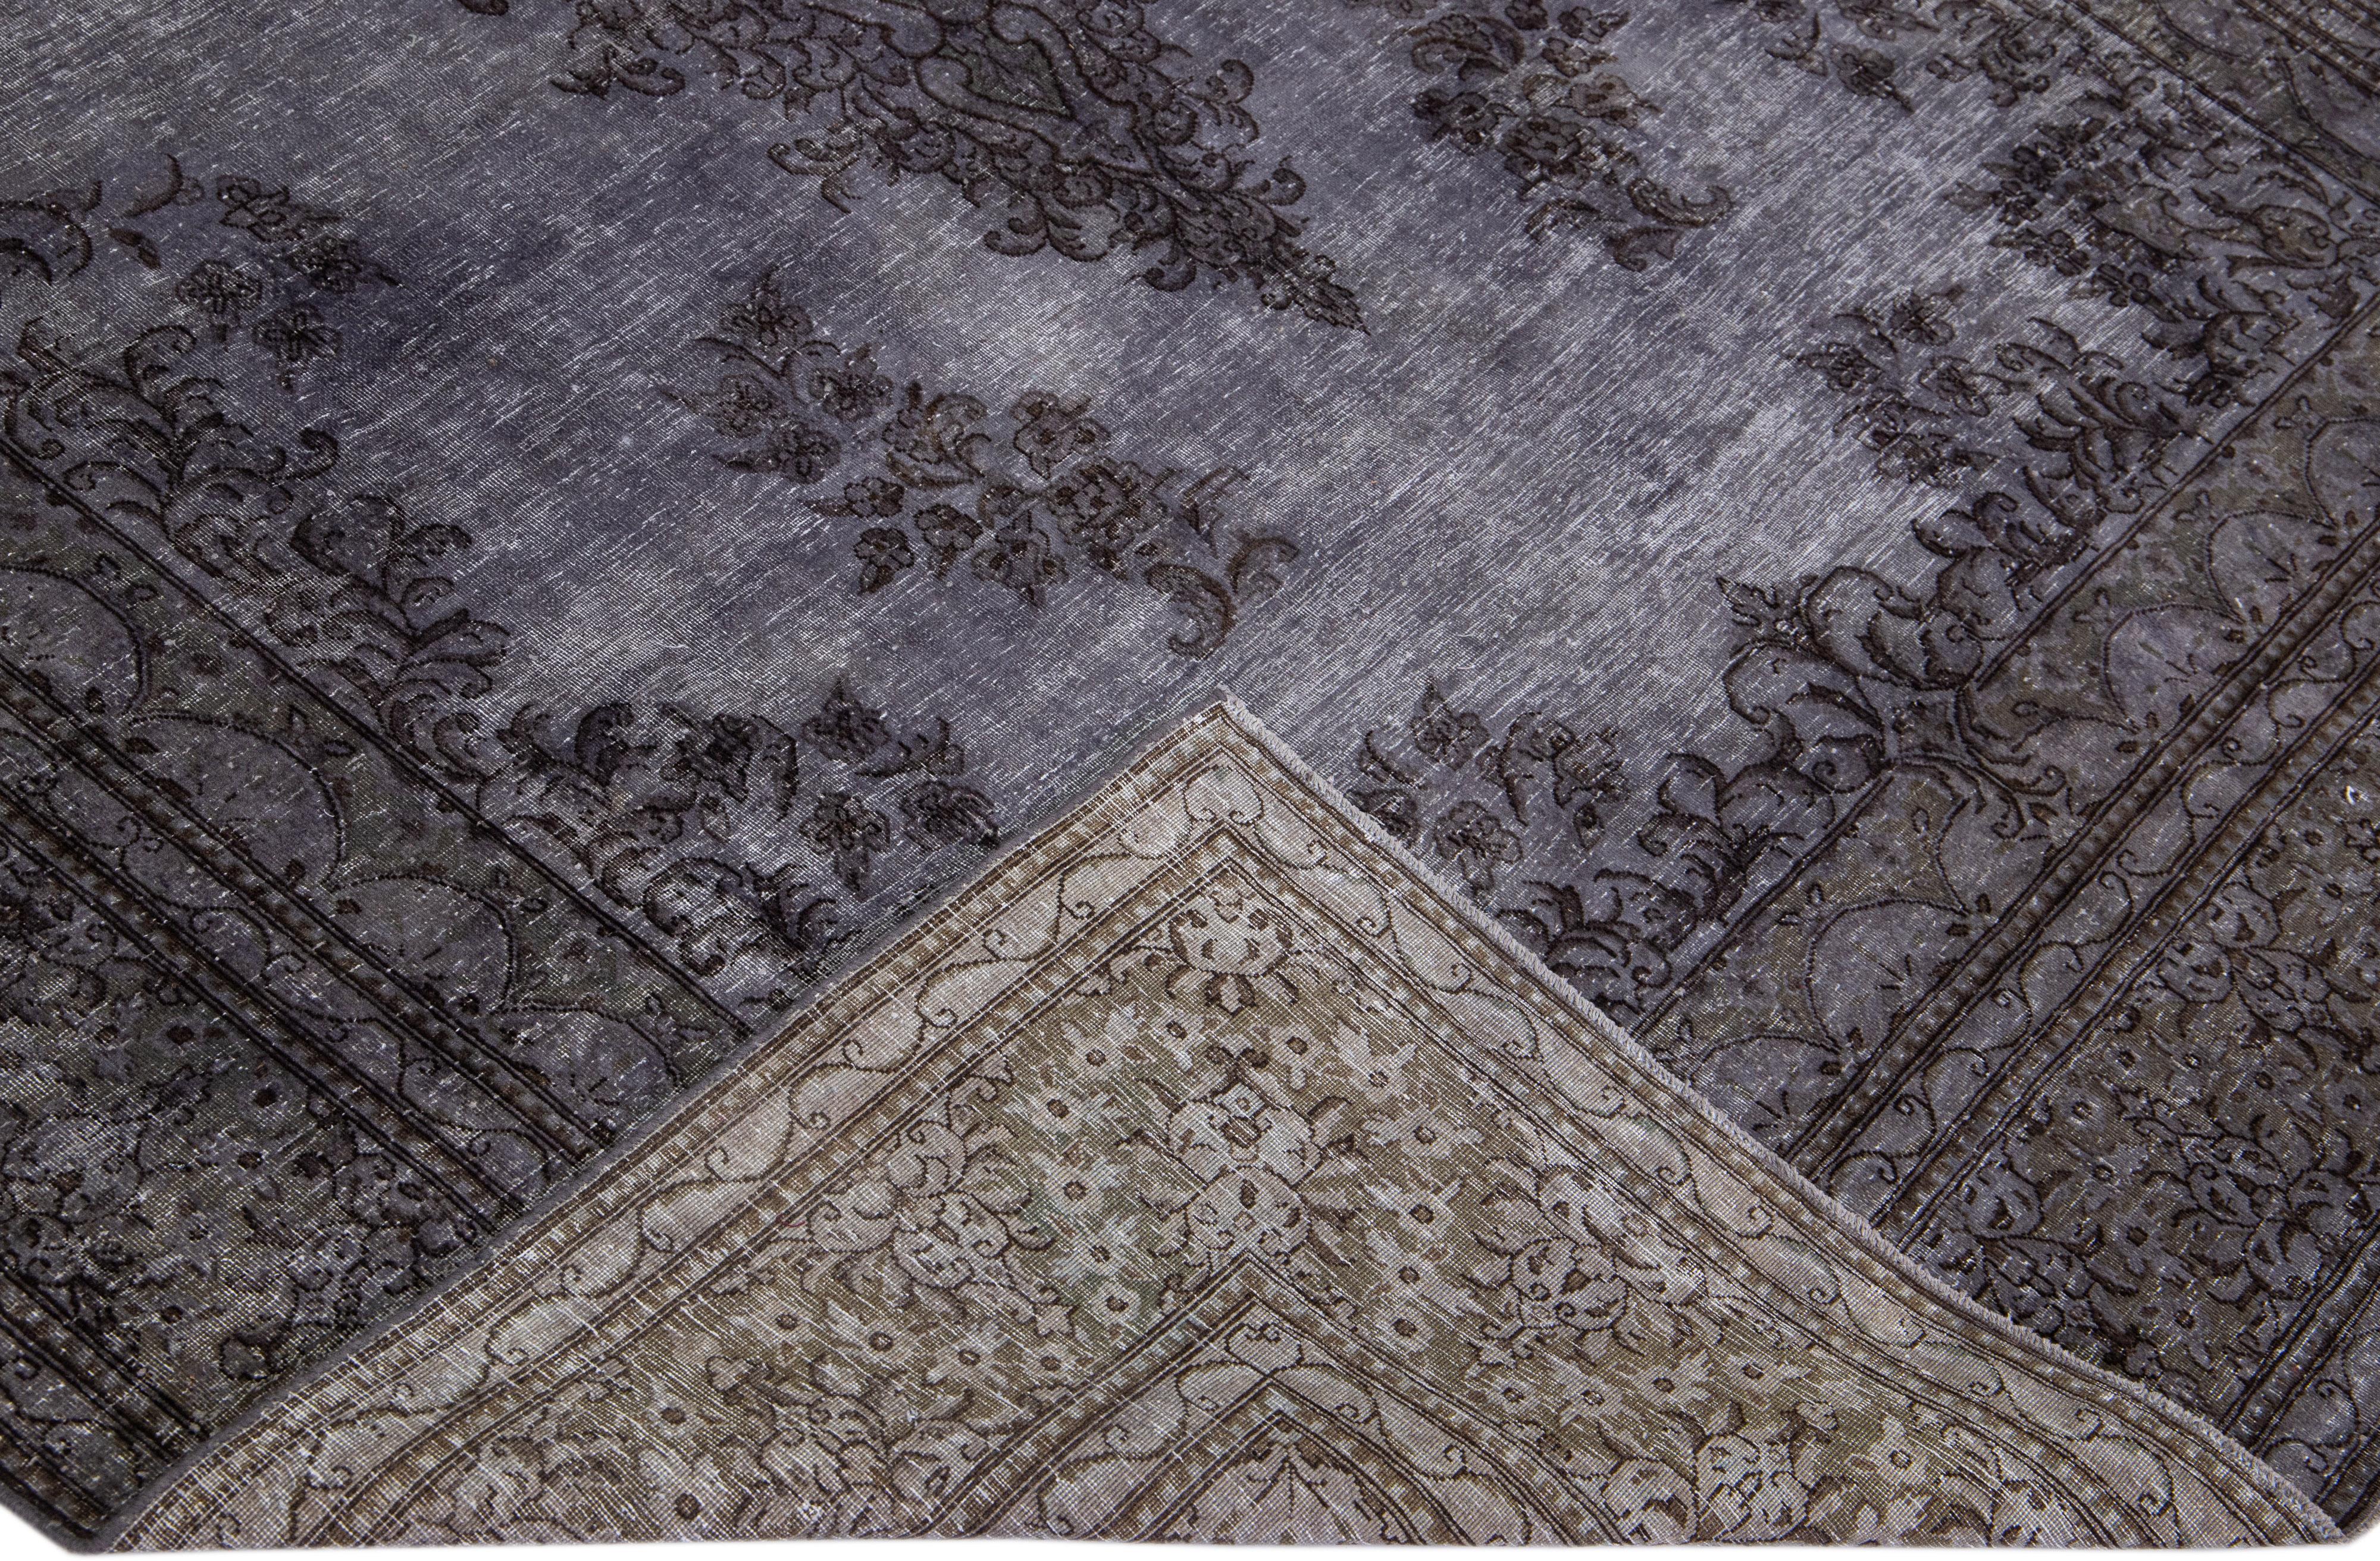 Beautiful vintage Overdyed hand-knotted wool rug with a gray field. This Persian rug has black accents in an all-over medallion design.

This rug measures: 6'11